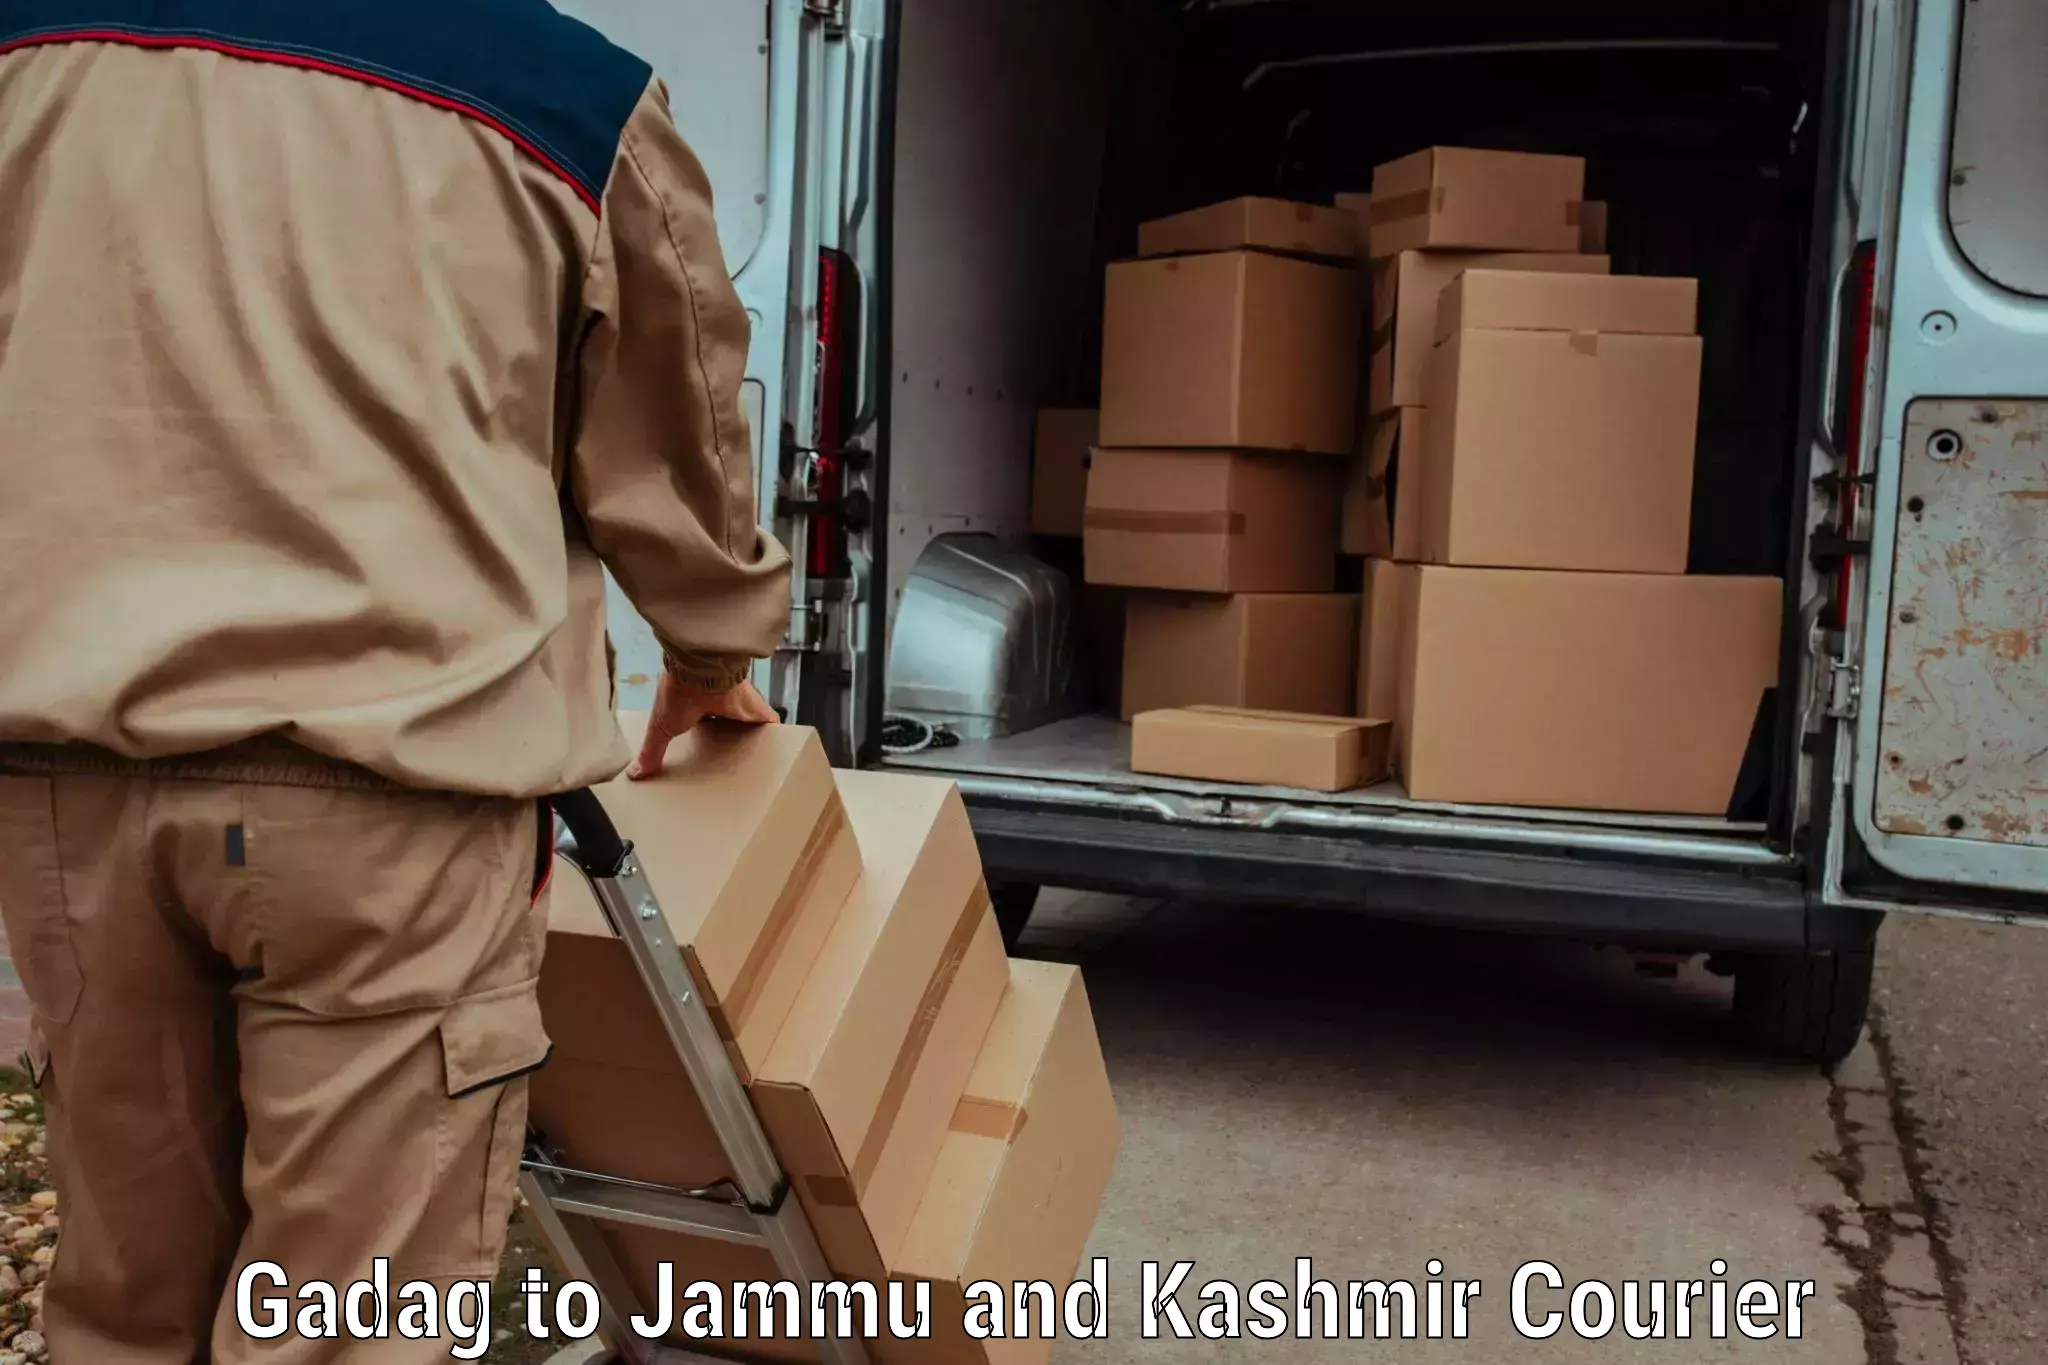 Reliable delivery network Gadag to Jammu